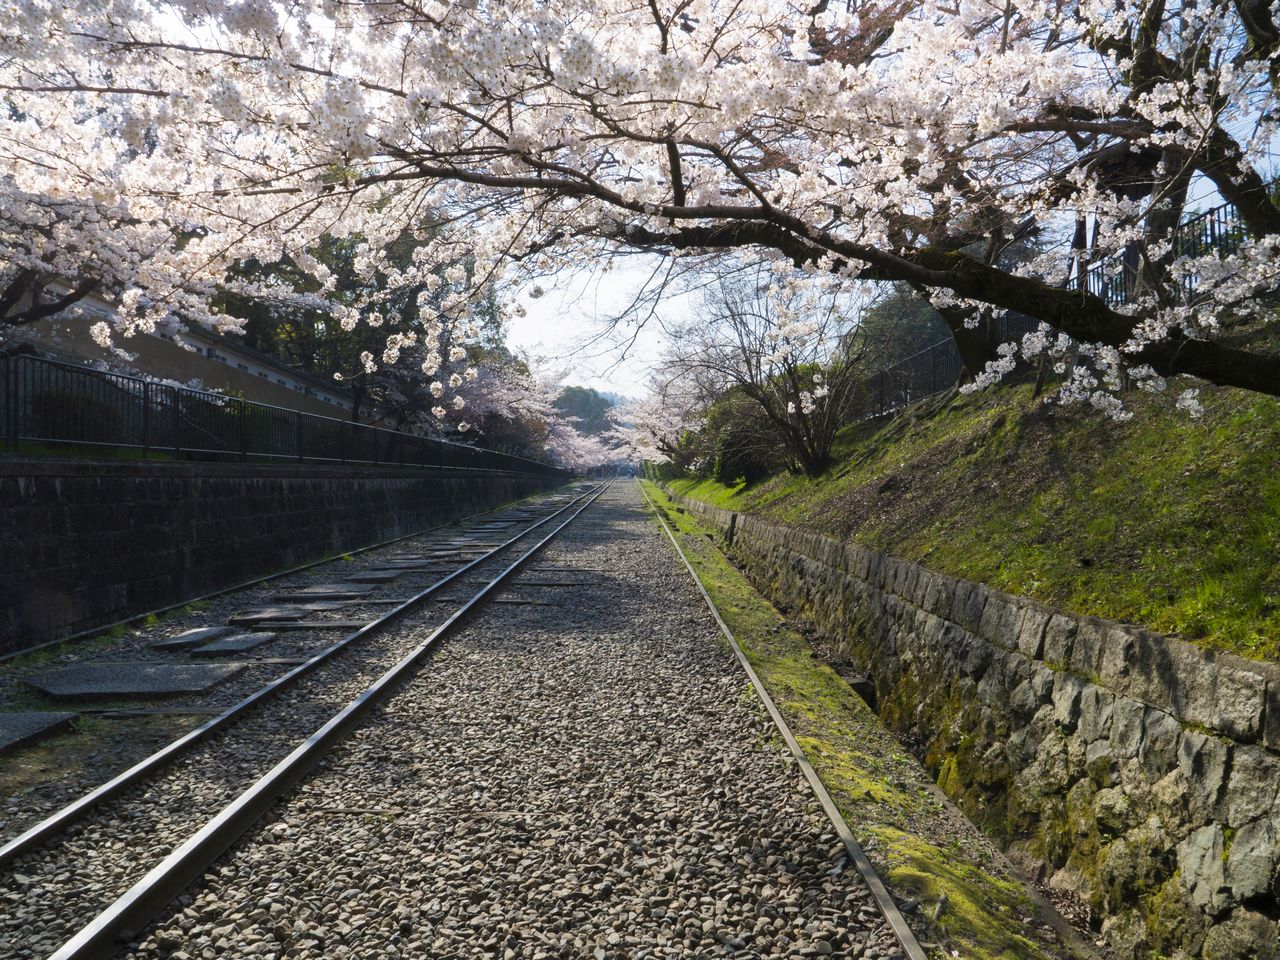 The disused track passes through a tunnel of blossoms. 